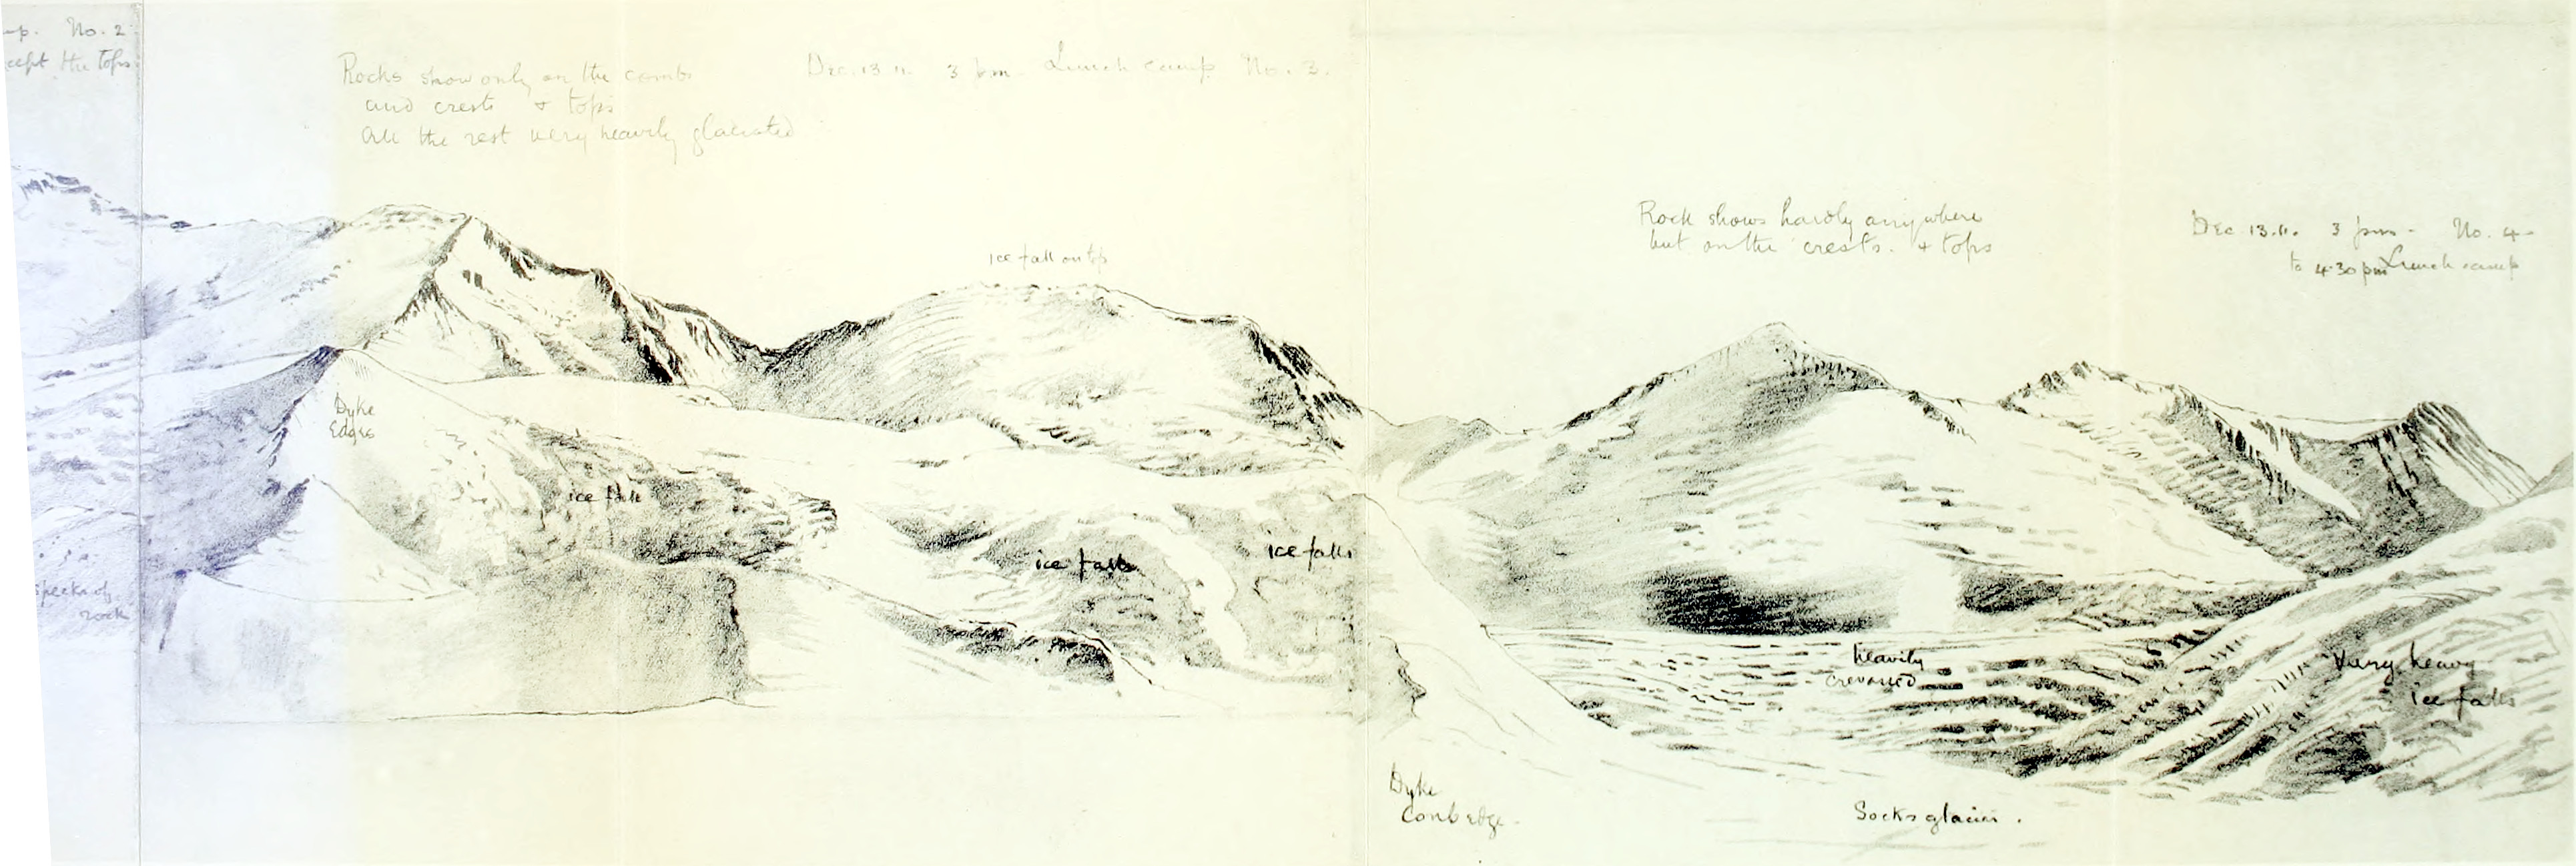 Fold-out panoramic drawing of mountains with handwritten notes